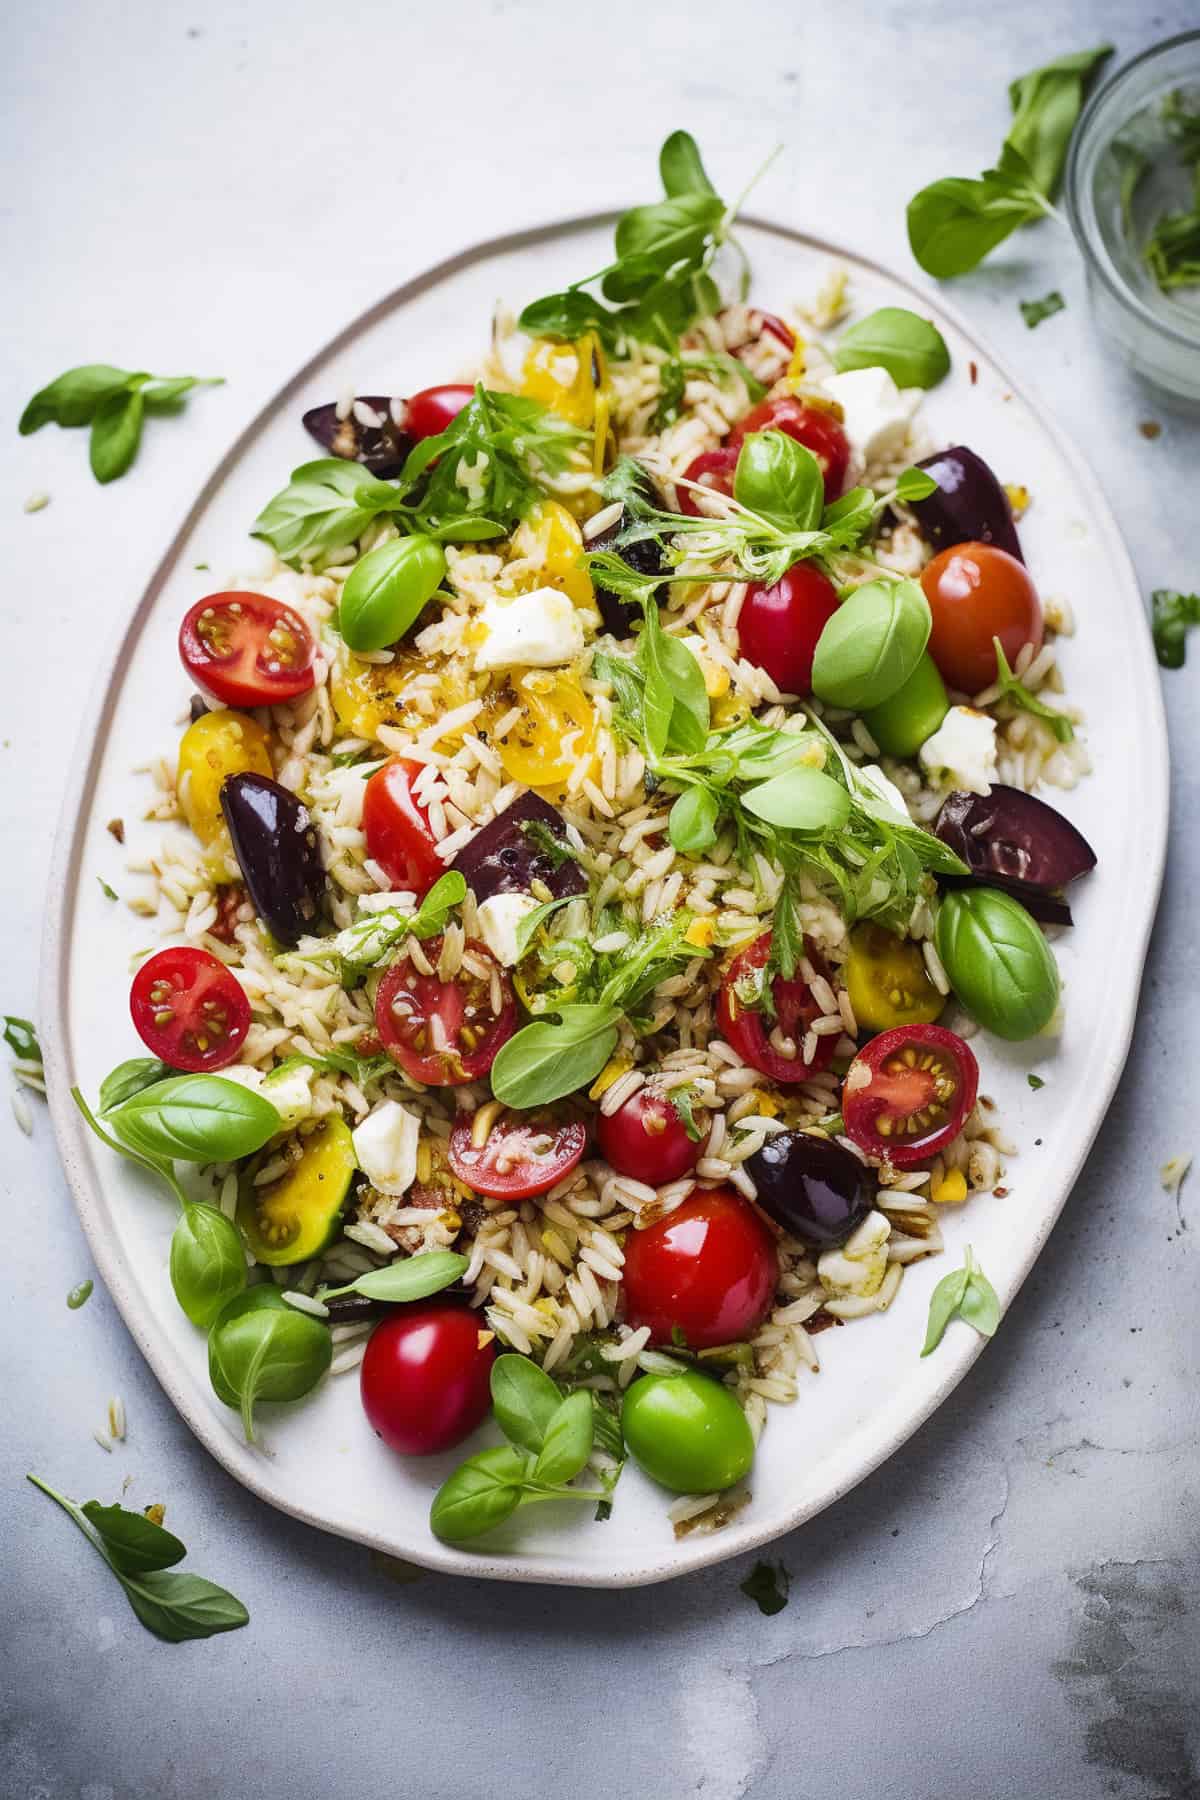 Rice salad with basil and tomatoes.